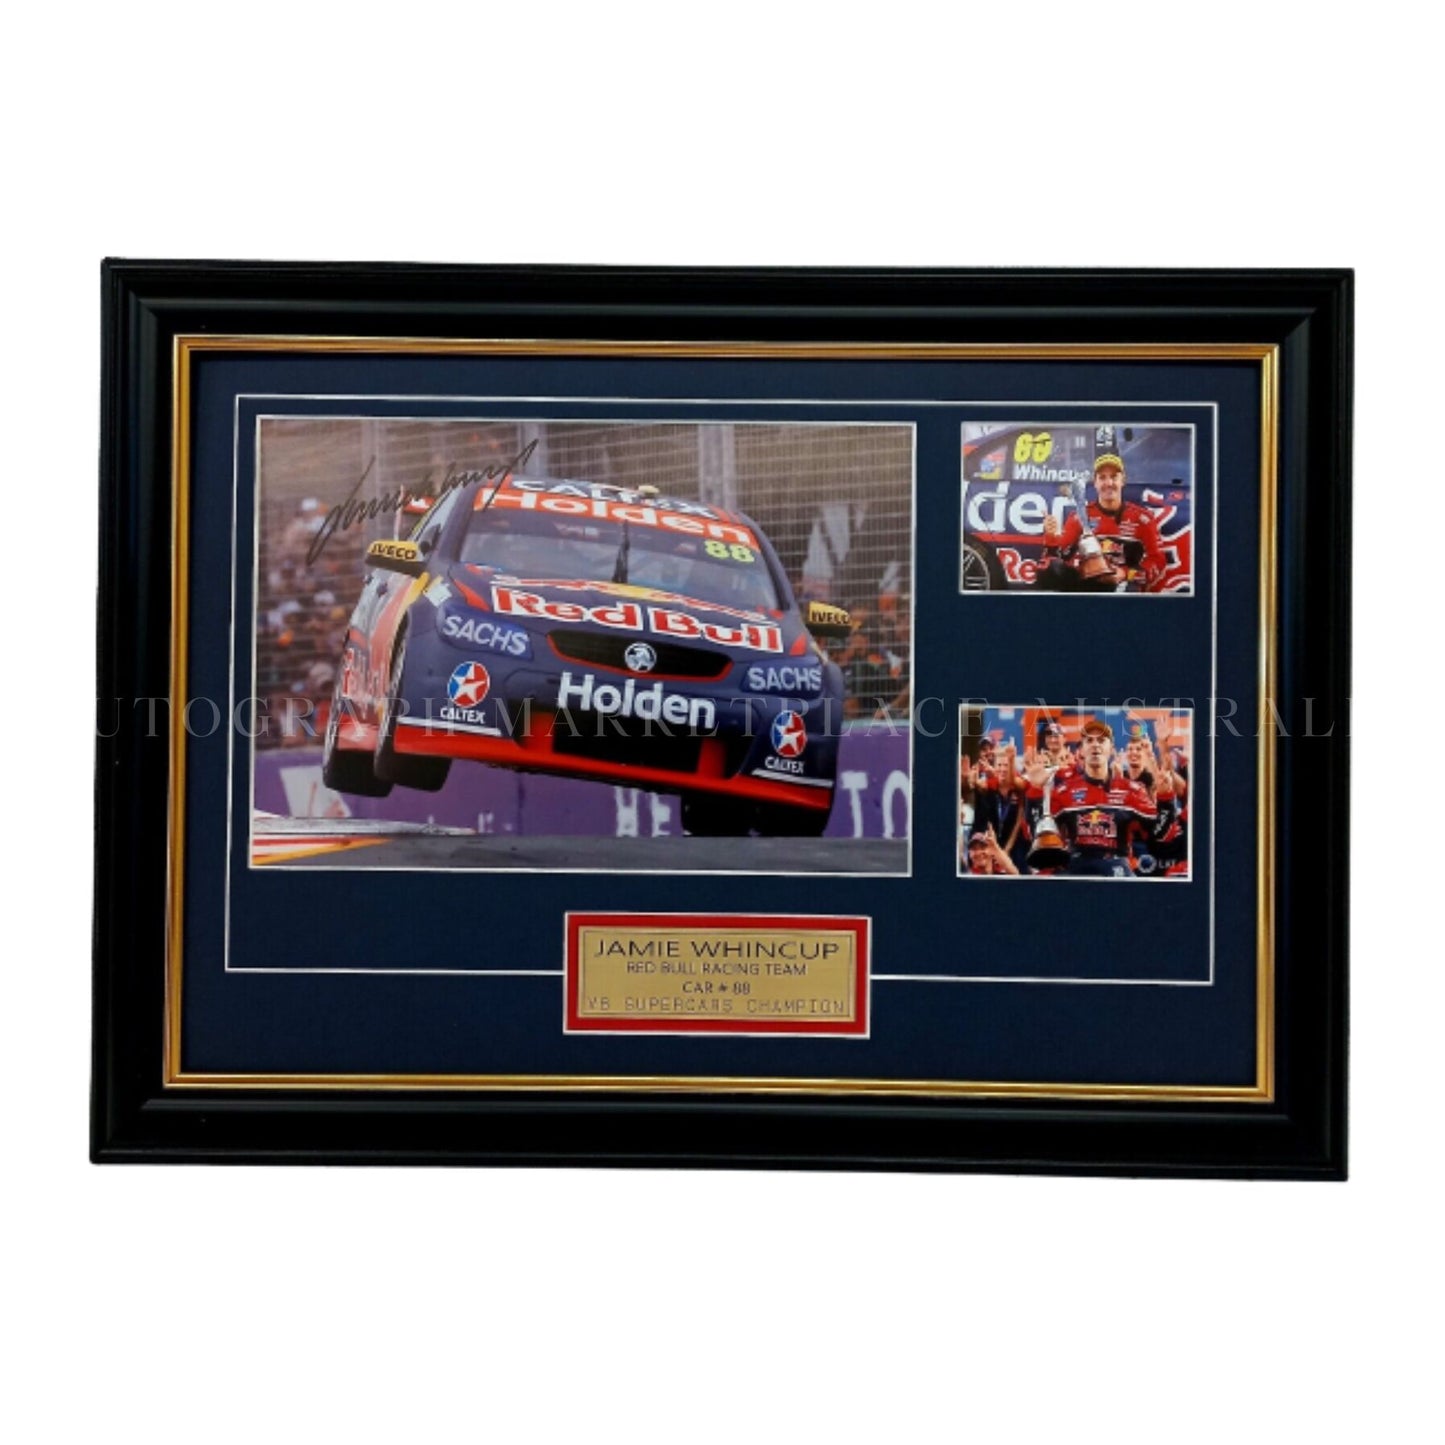 Jamie Whincup V8 Supercars Champion Signed Framed